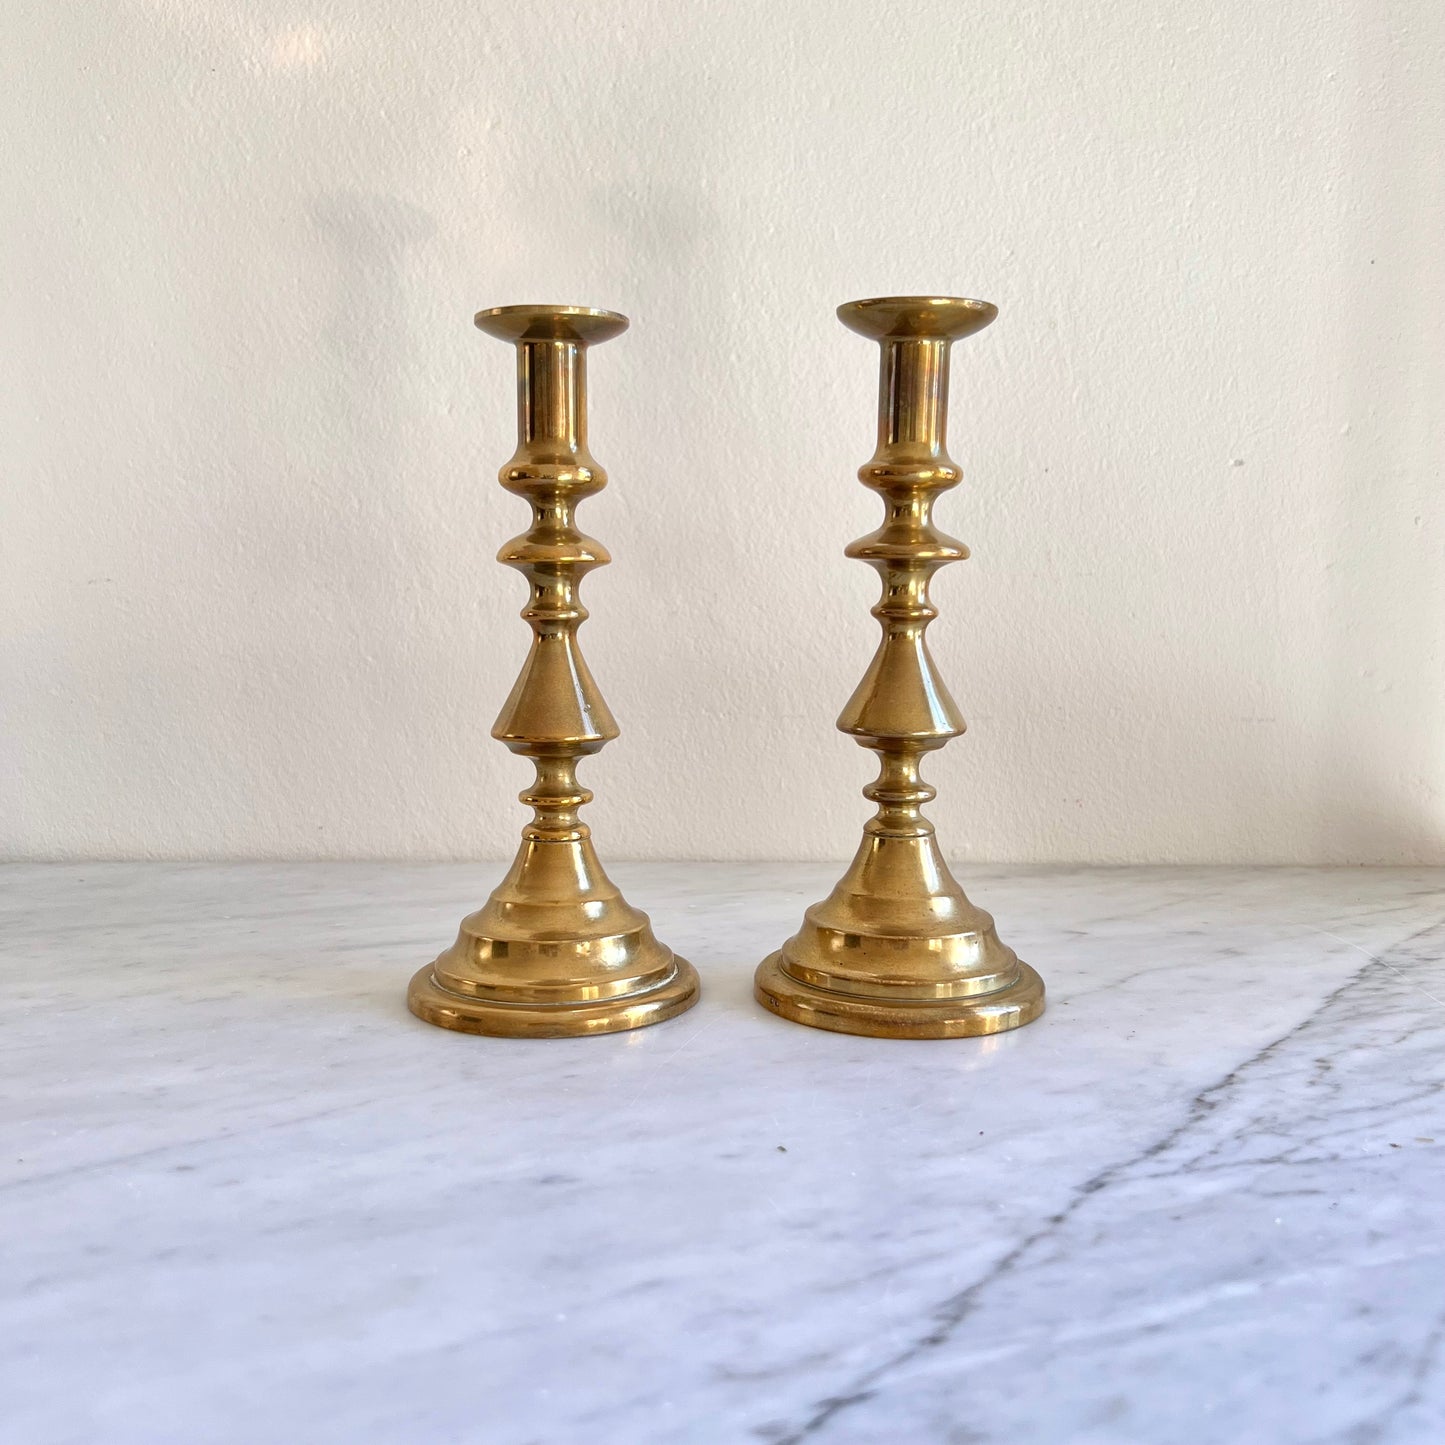 Vintage Tall Brass candle holders made in England